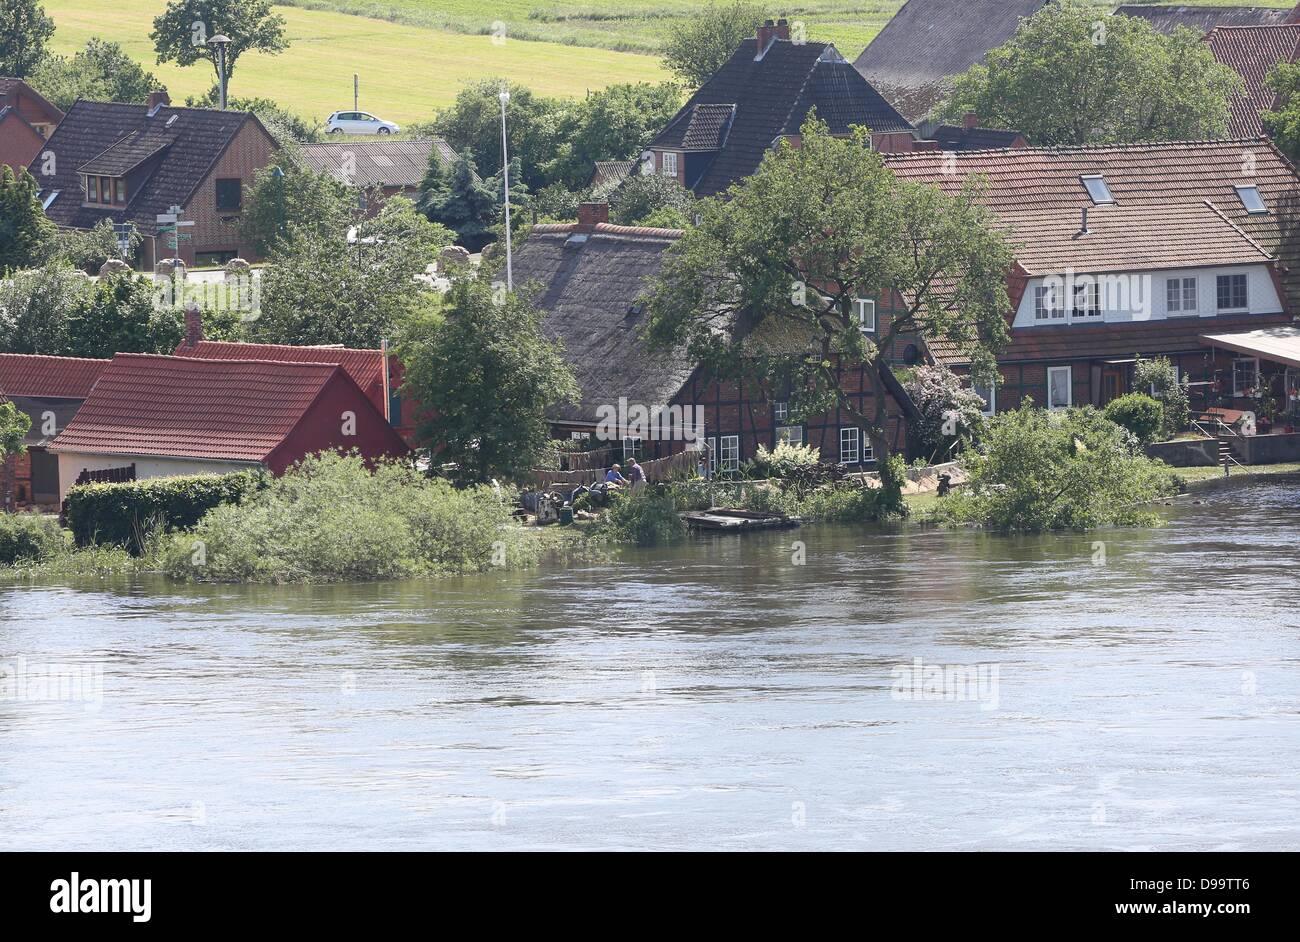 The Elbe River floods the town of Hohnstorf, Germany, 15 June 2013. The flooding along the Elbe in north Germany is receeding. Photo: BODO MARKS Stock Photo